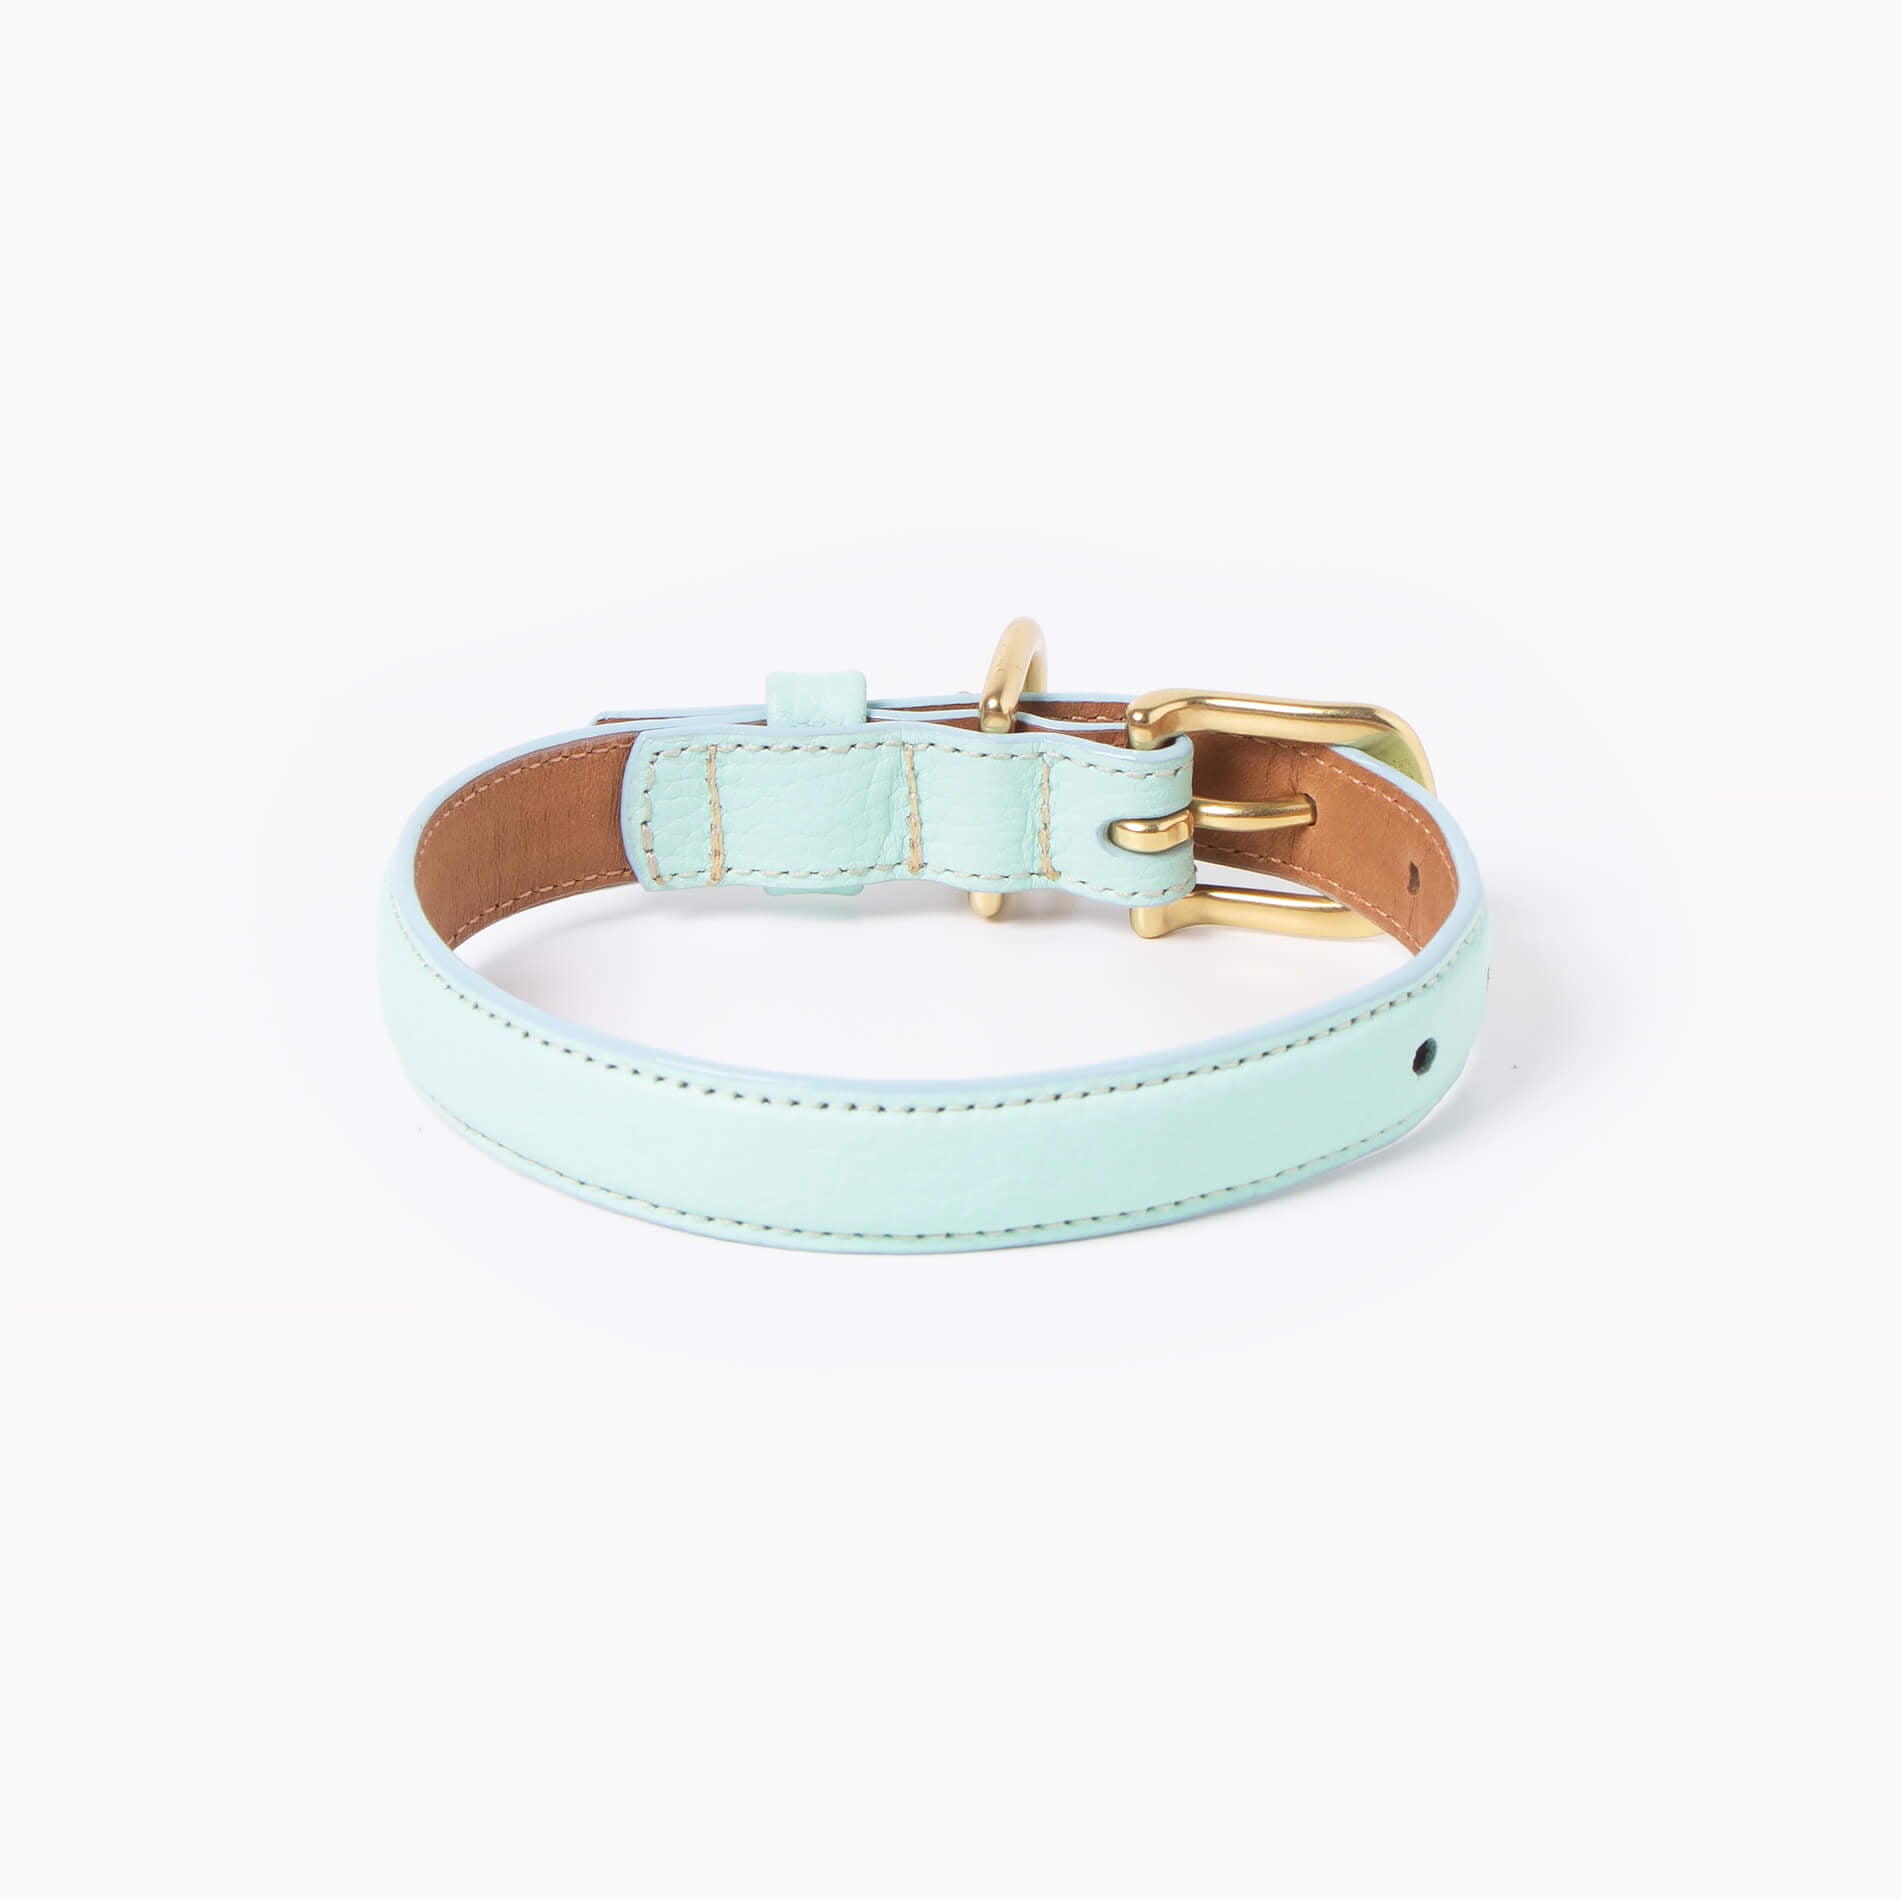 Mint leather dog collar with with brass hardware and tag ID. Luxury dog collar.